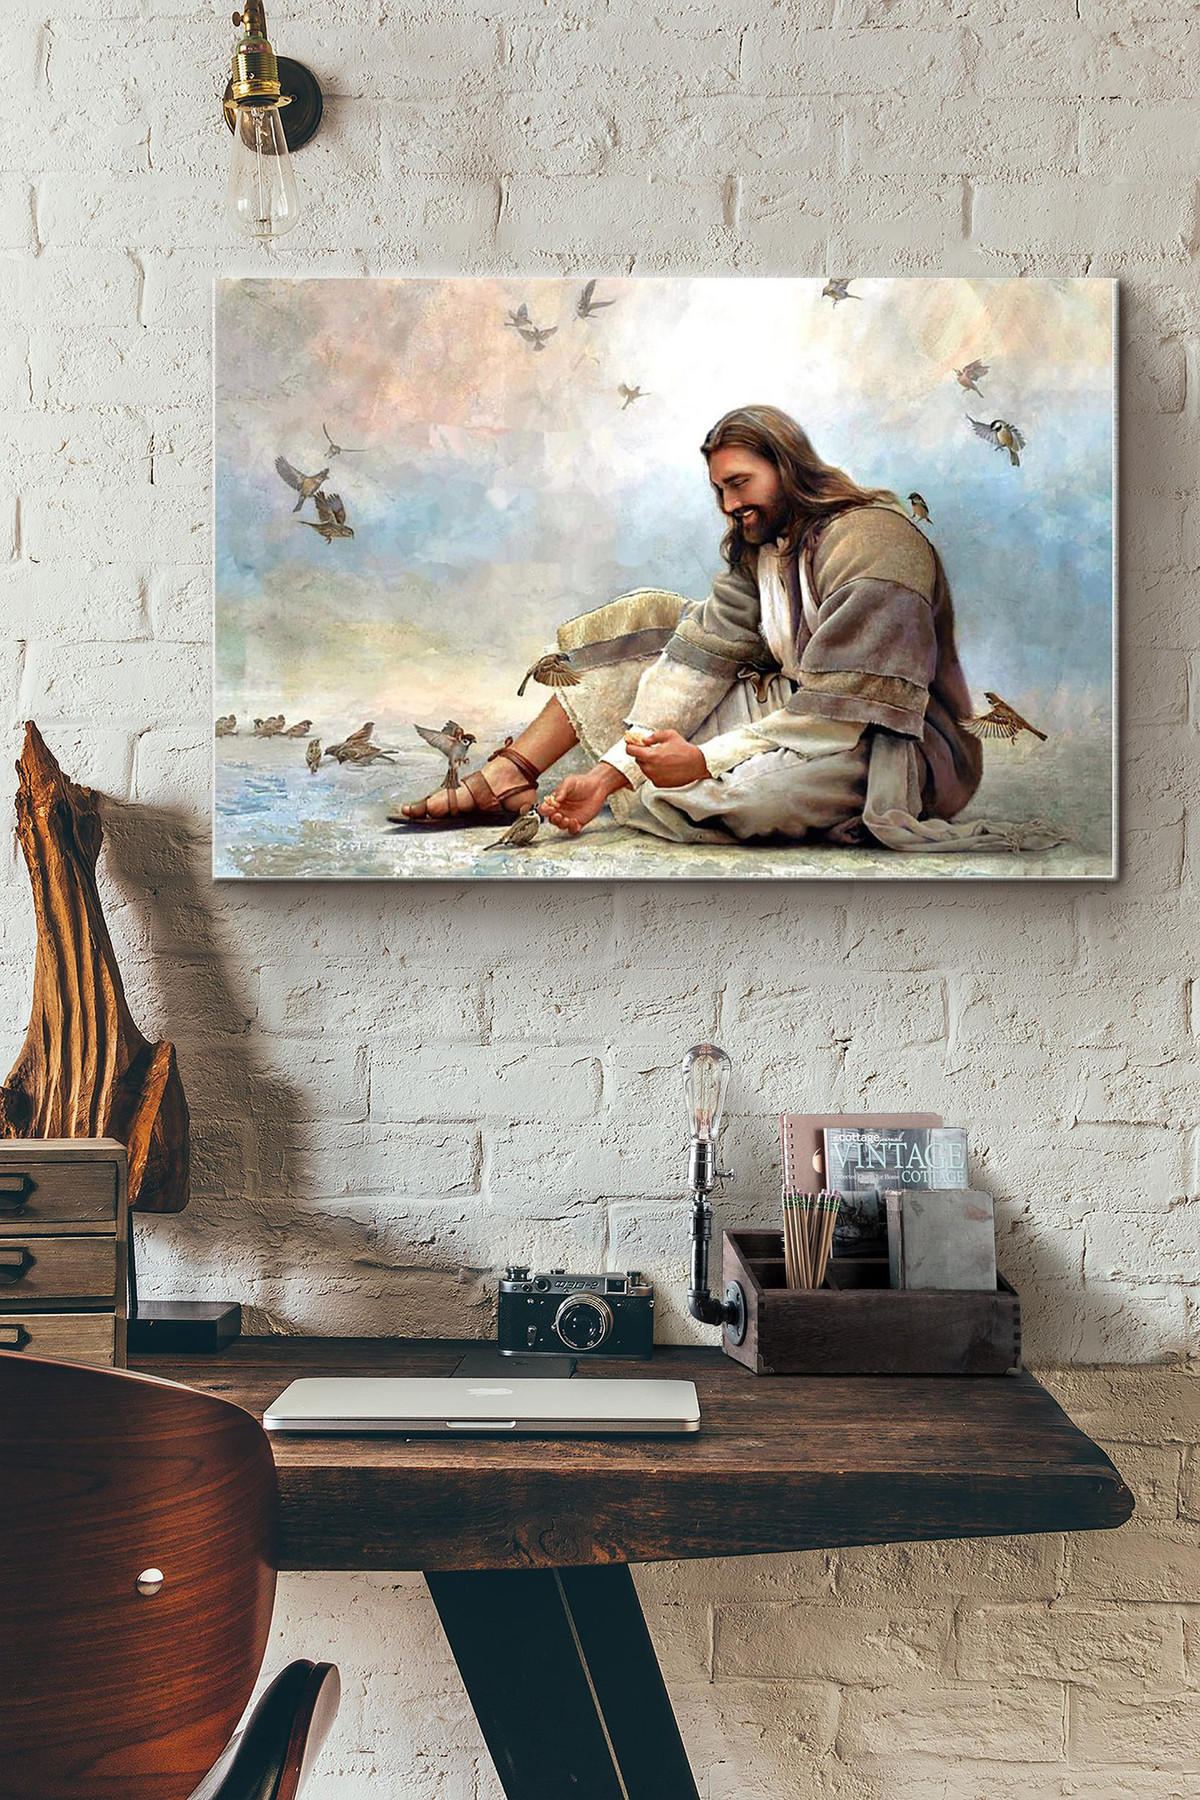 Jesus Sit On The Beach Feeding Sparrow Canvas Painting Ideas, Canvas Hanging Prints, Gift Idea Framed Prints, Canvas Paintings Wrapped Canvas 8x10